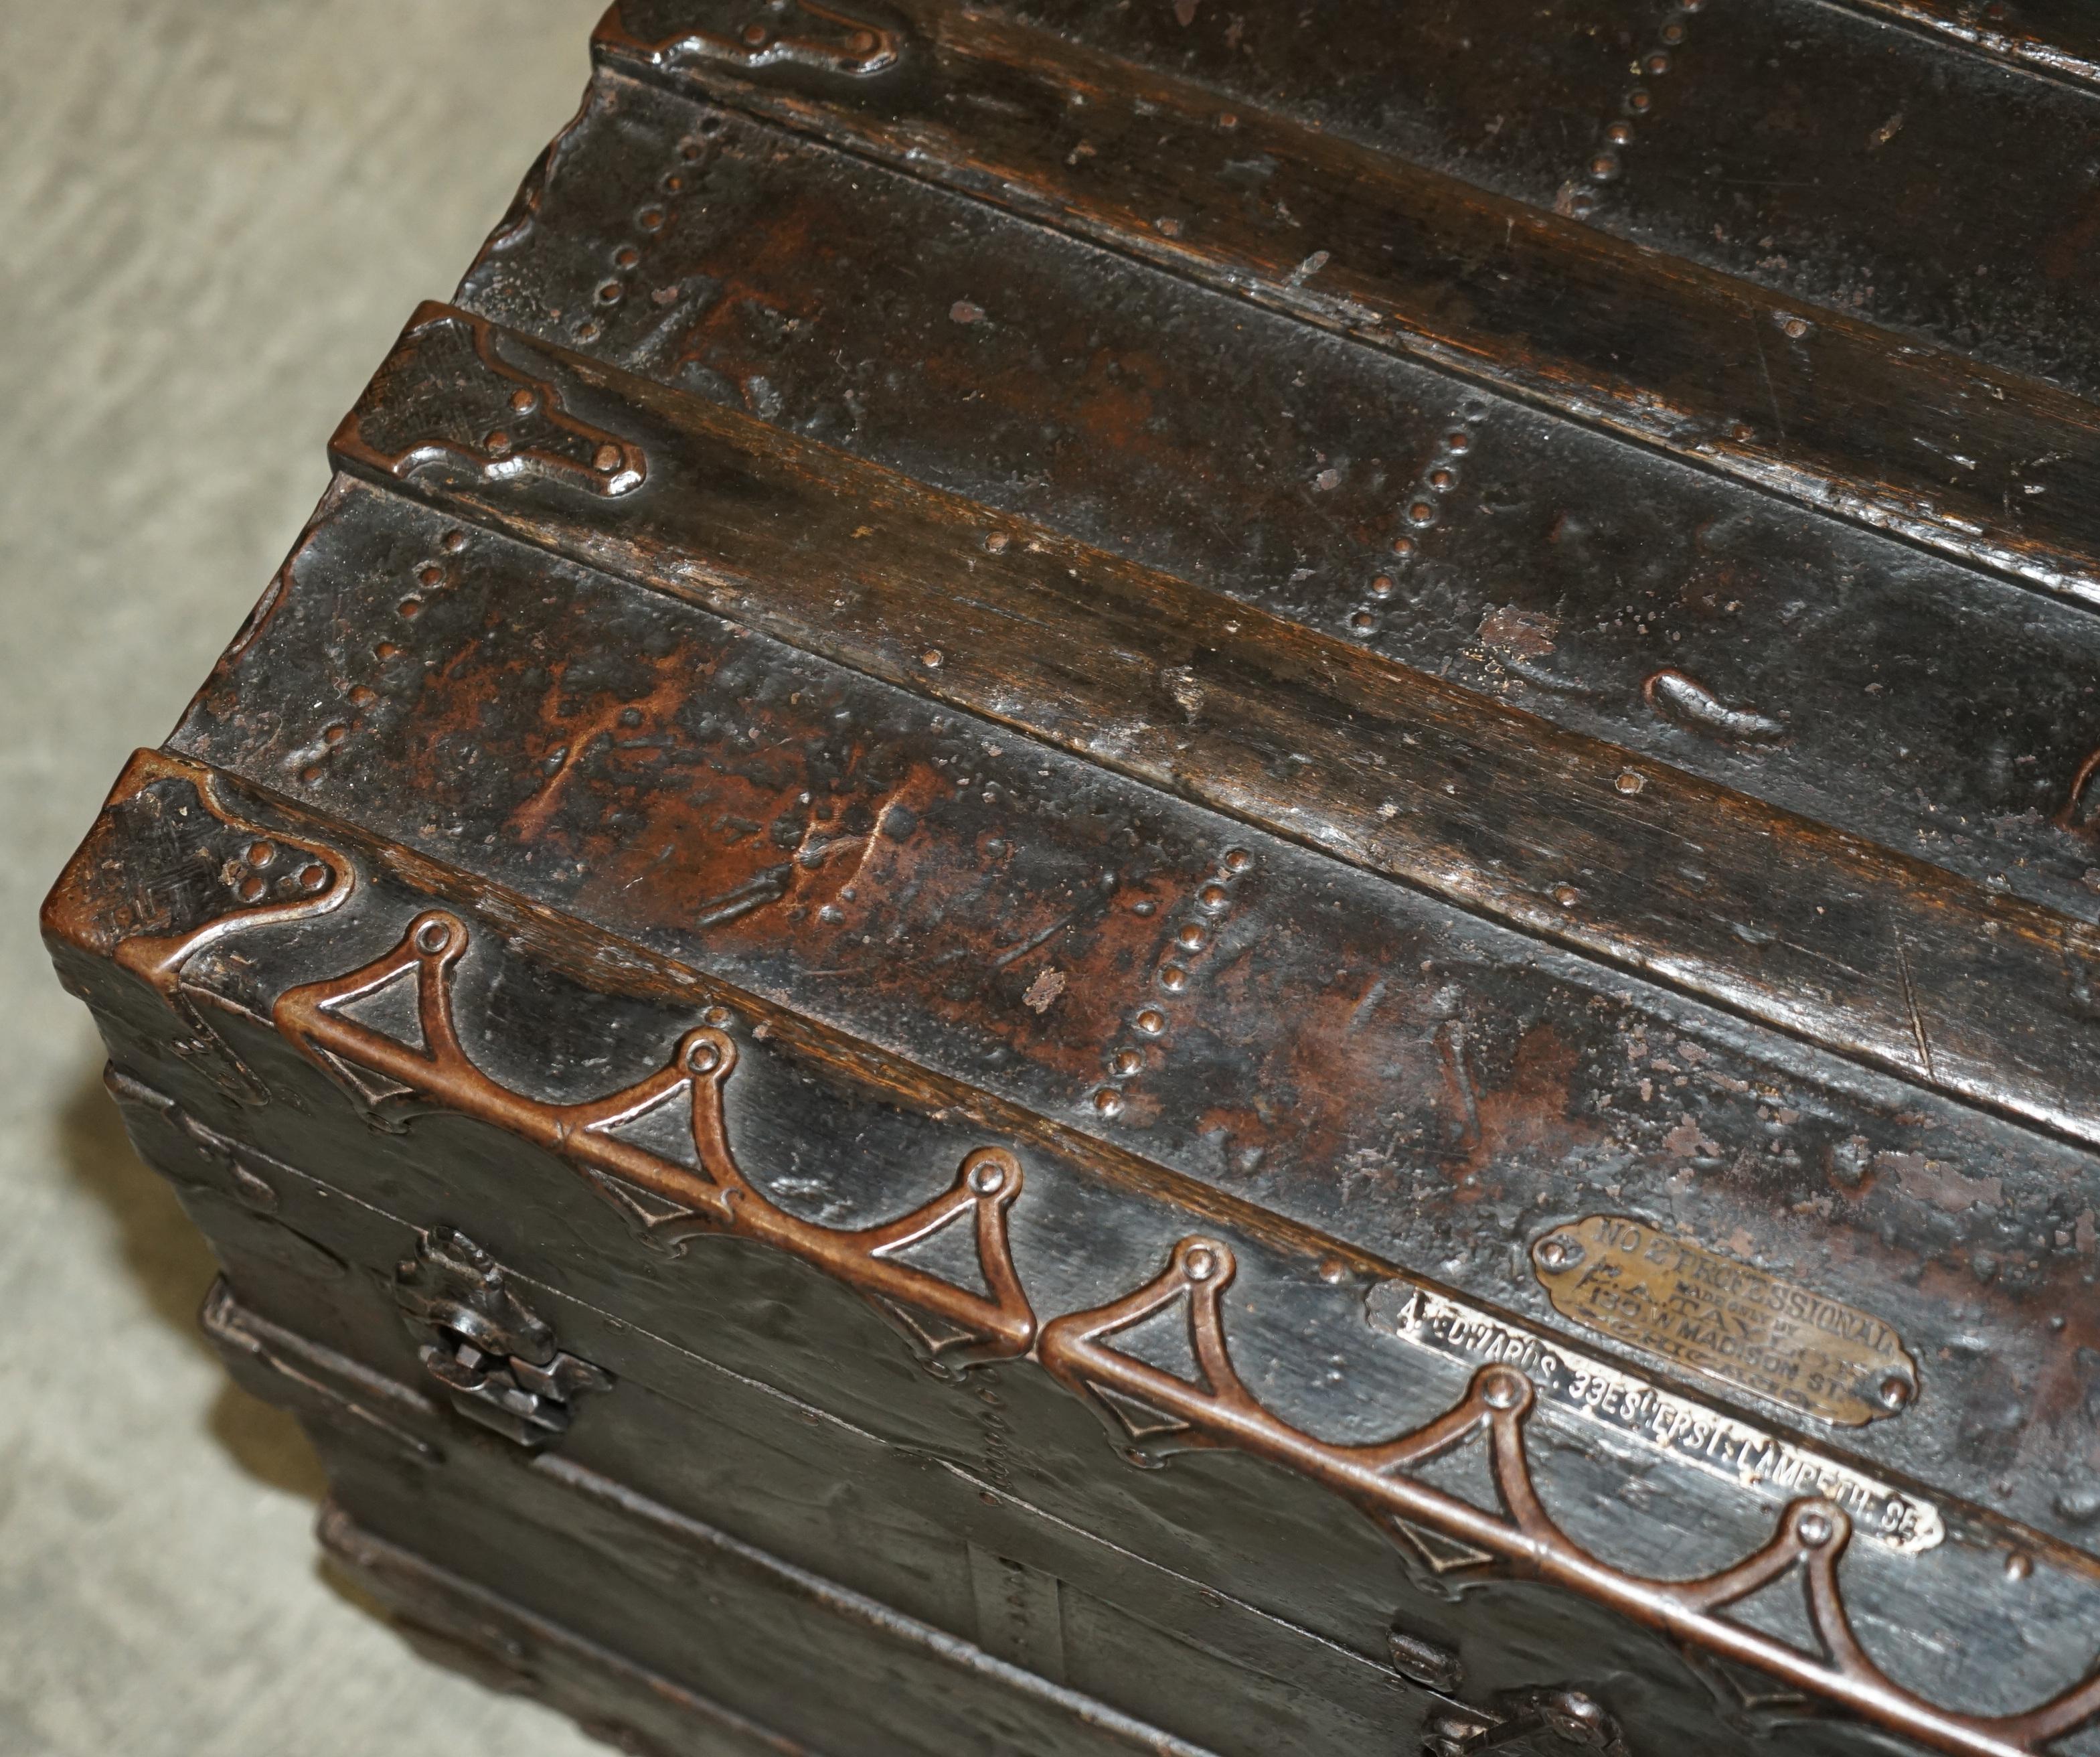 Hand-Crafted Antique circa 1889 American Steamer Trunk Chest by CA Taylor 130 Madison Chicago